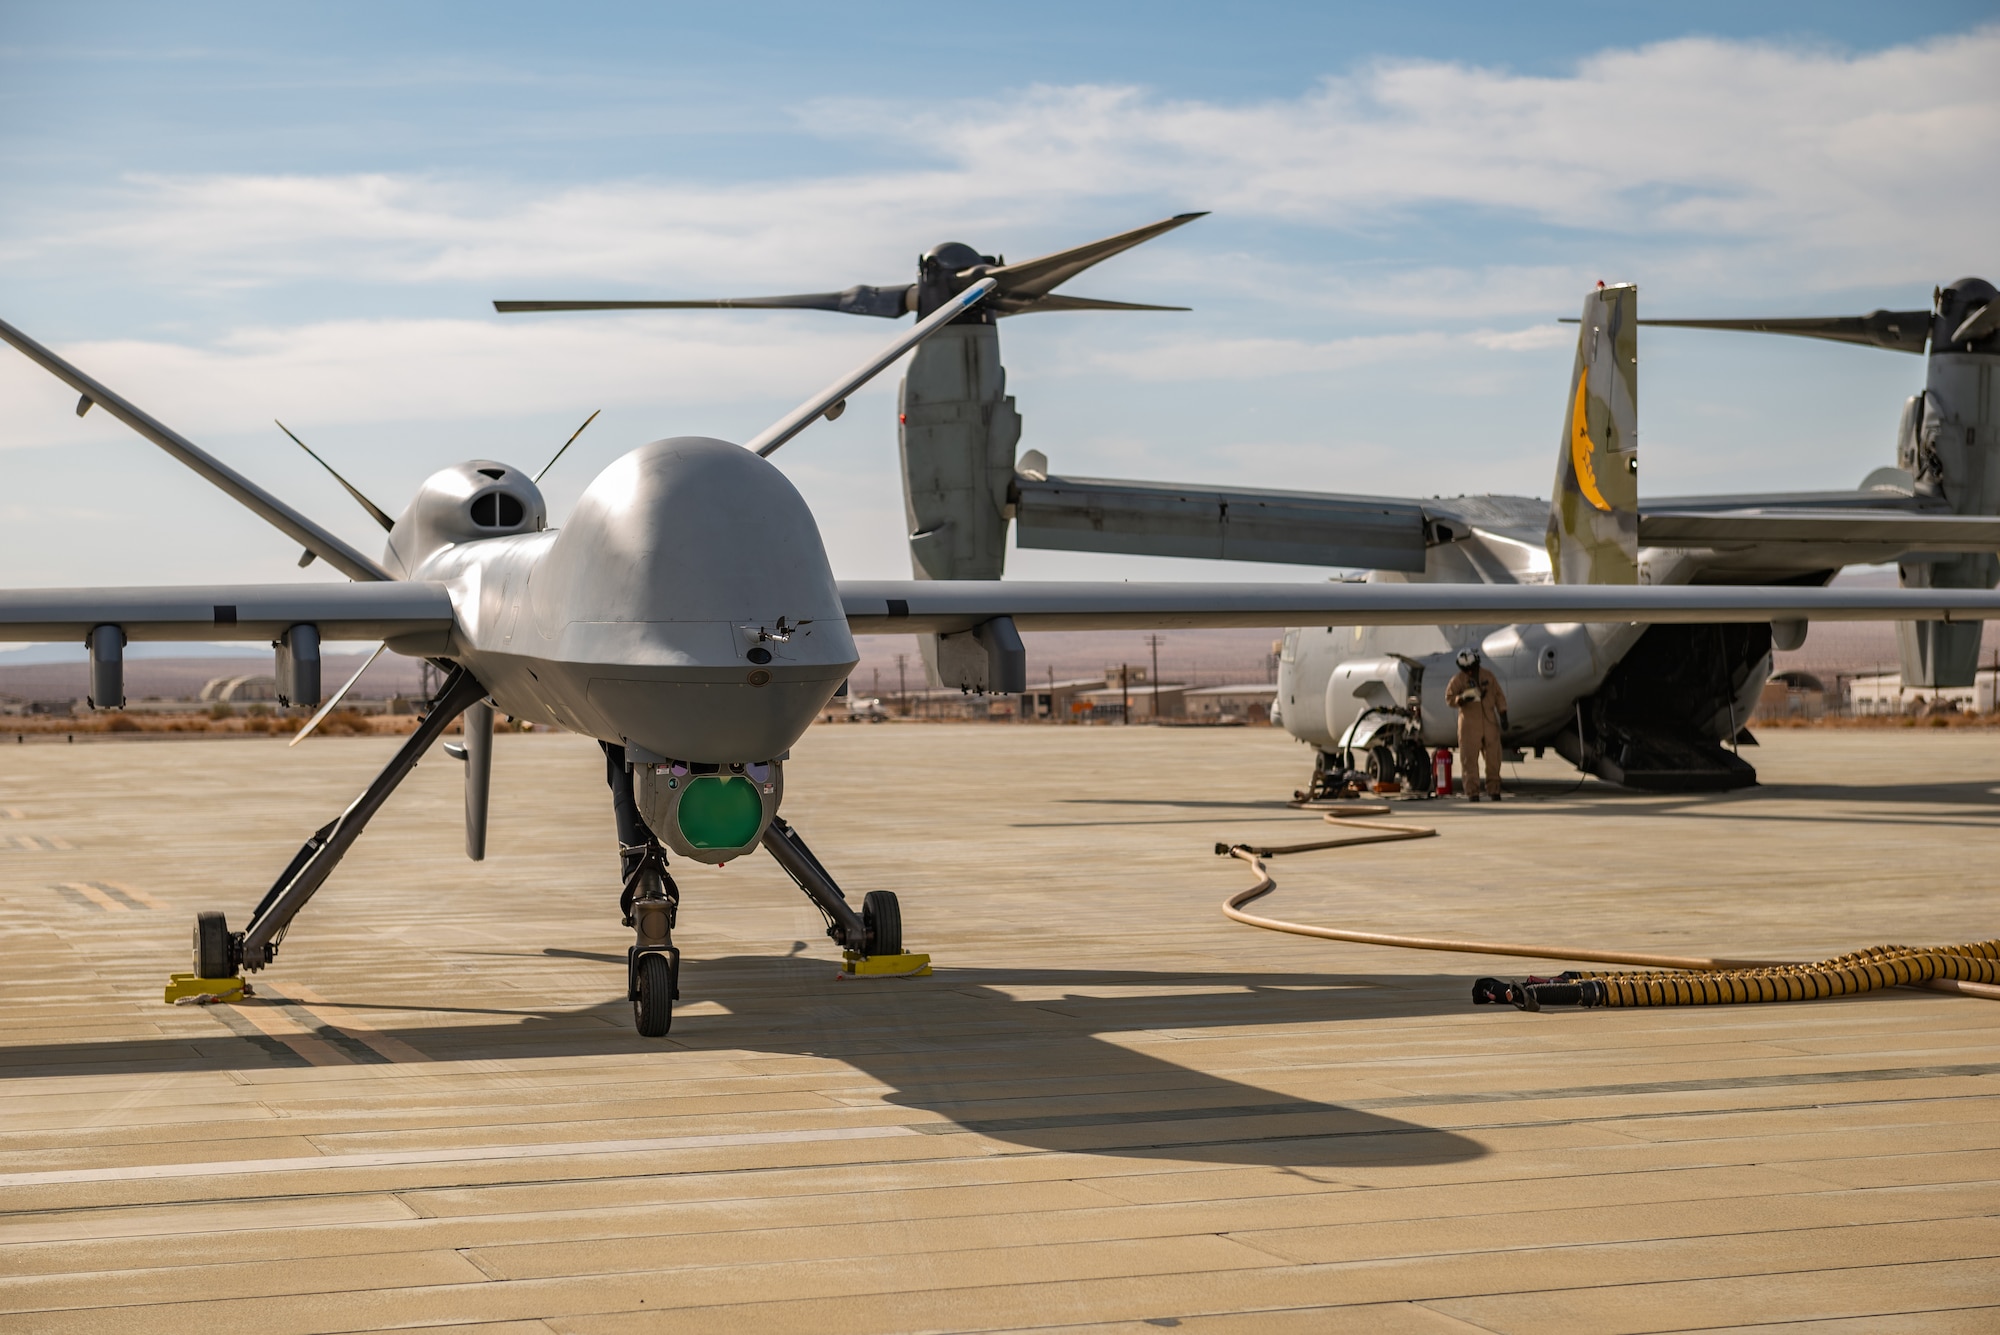 An MQ-9 Reaper assigned to the 163d Attack Wing, March Air Reserve Base stages for refueling on the Strategic Expeditionary Landing Field on Marine Corps Air Ground Combat Center Twentynine Palms, California, July 21, 2022.The 163d accelerated change by pioneering the first ever refuel of the MQ-9 Reaper using a Forward Area refueling Point provided by the VMM - 764’s V-22 Osprey. (U.S. Air National Guard photo by Staff Sgt. Joseph Pagan)